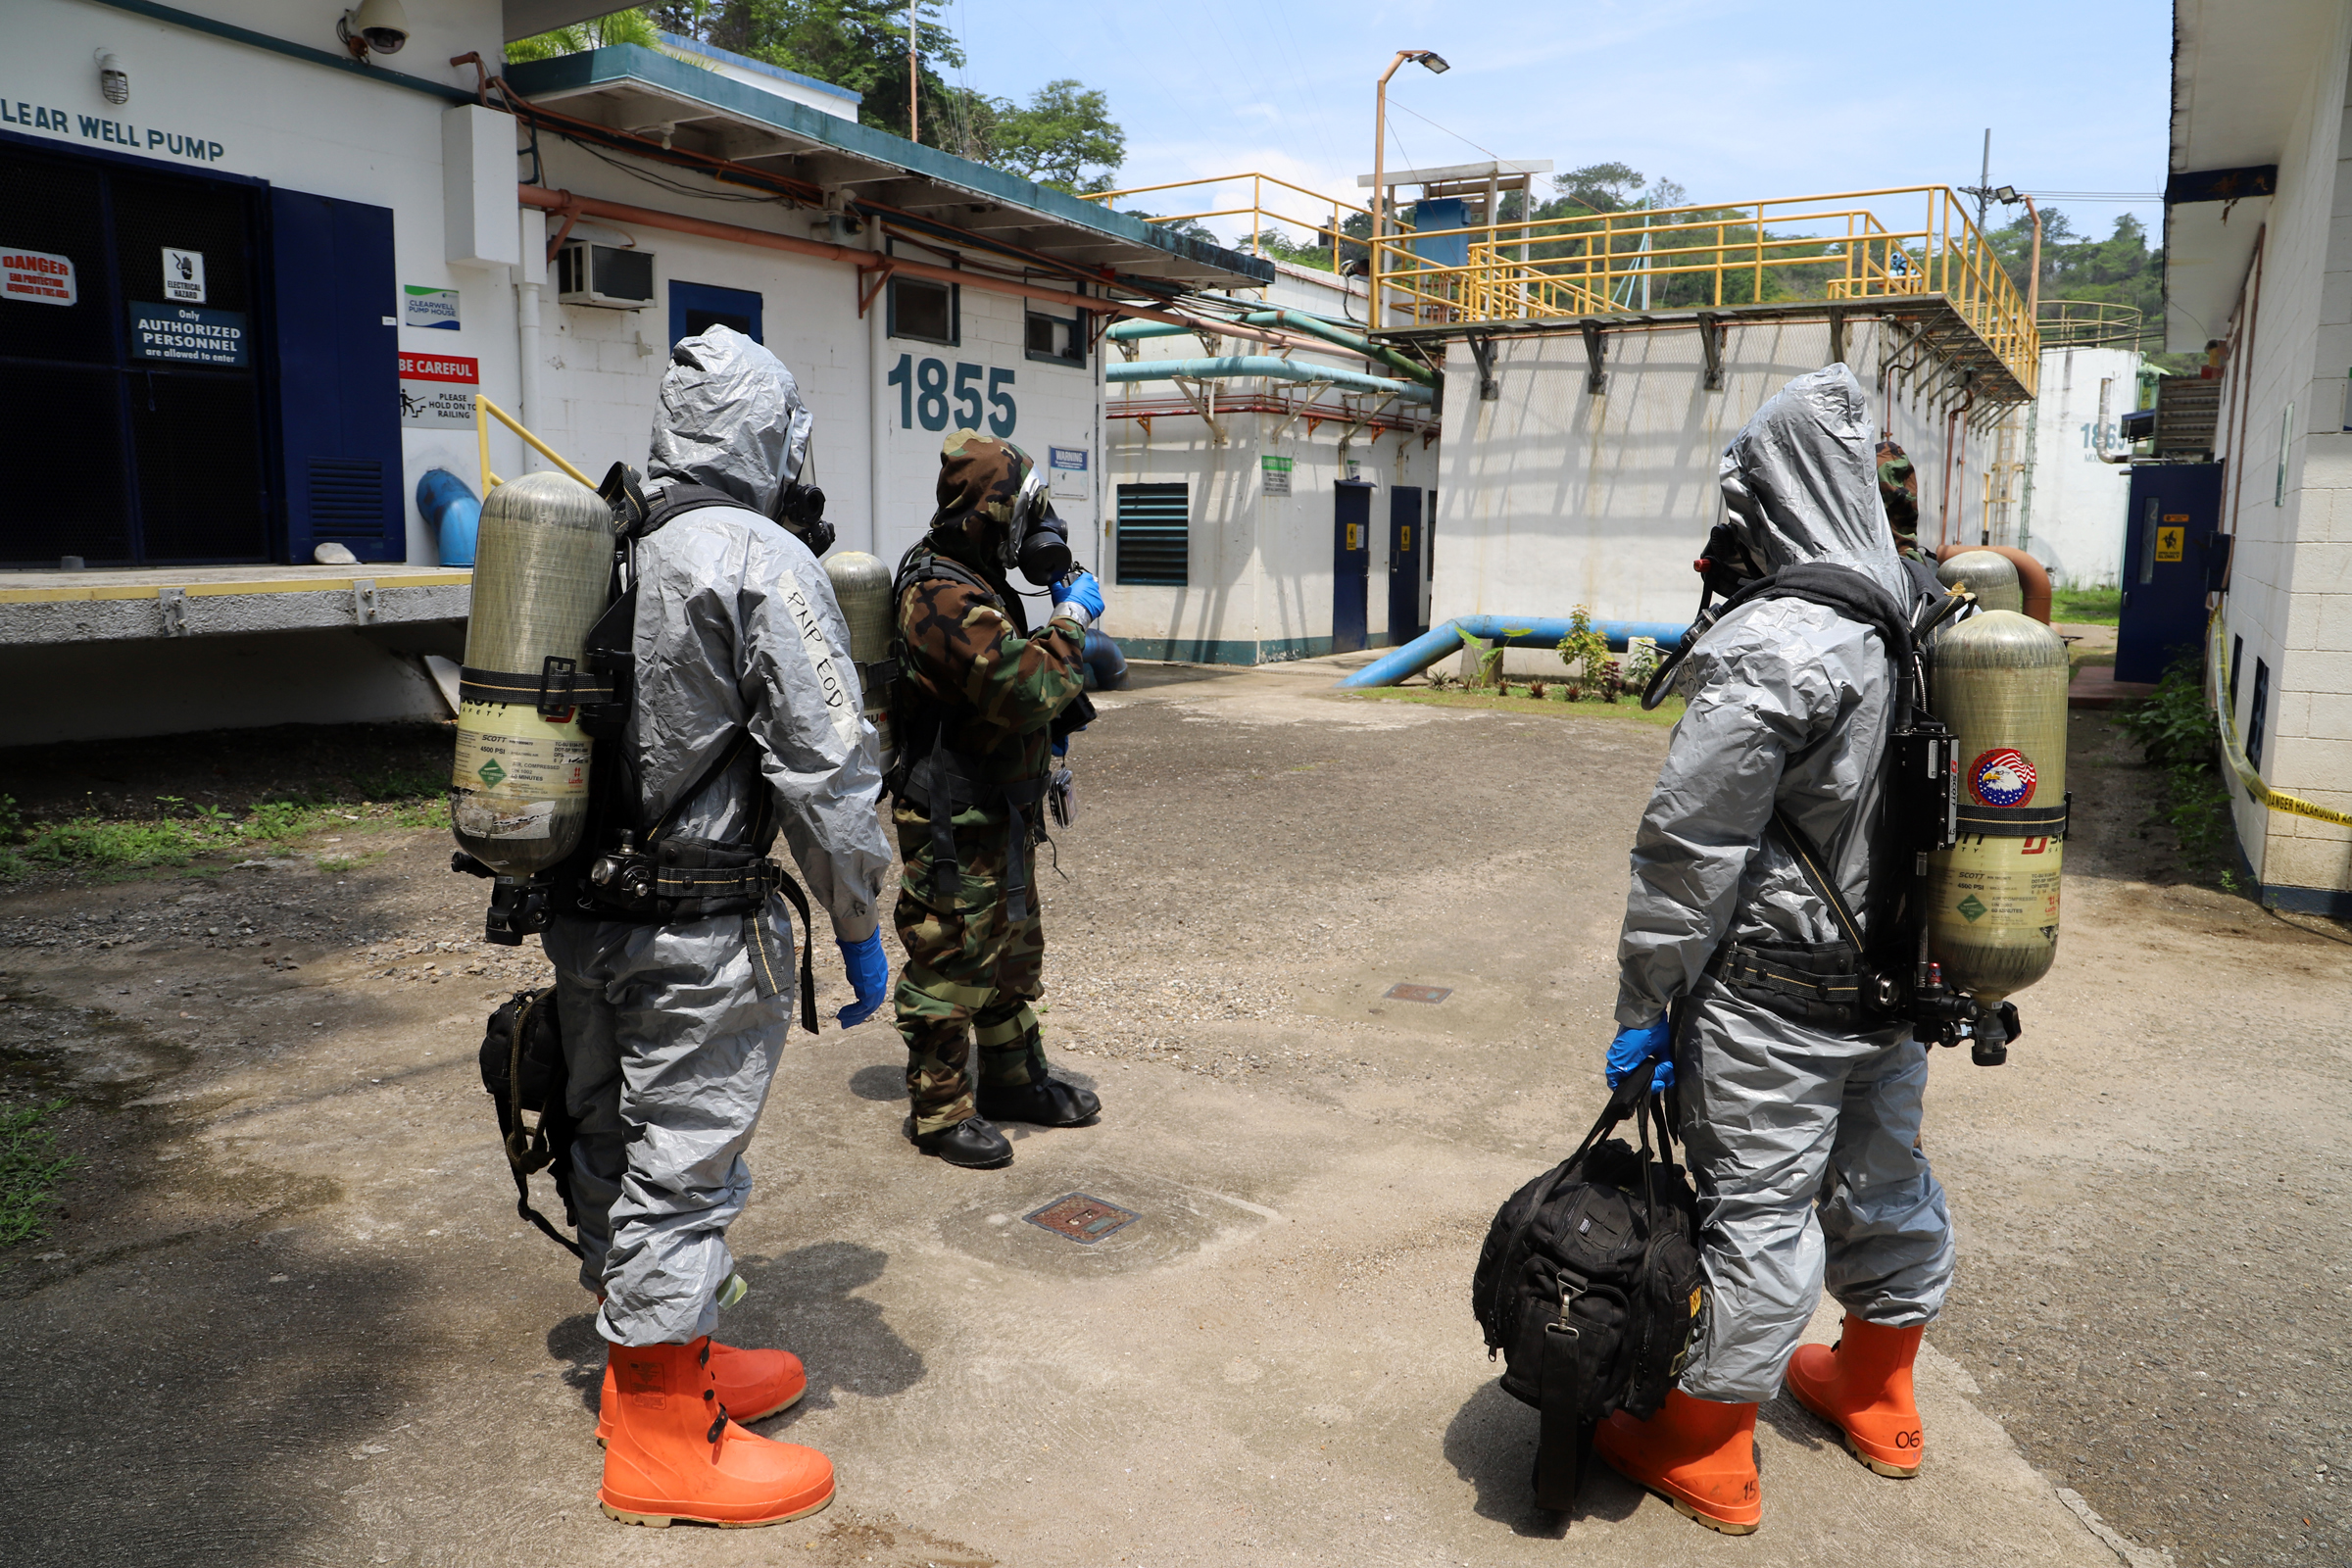 The Department of the Interior and Local Government (DILG) and the Subic Bay Metropolitan Authority (SBMA) recently staged a mock terrorism attack as part of the national government’s thrust to thwart terrorism in the country.